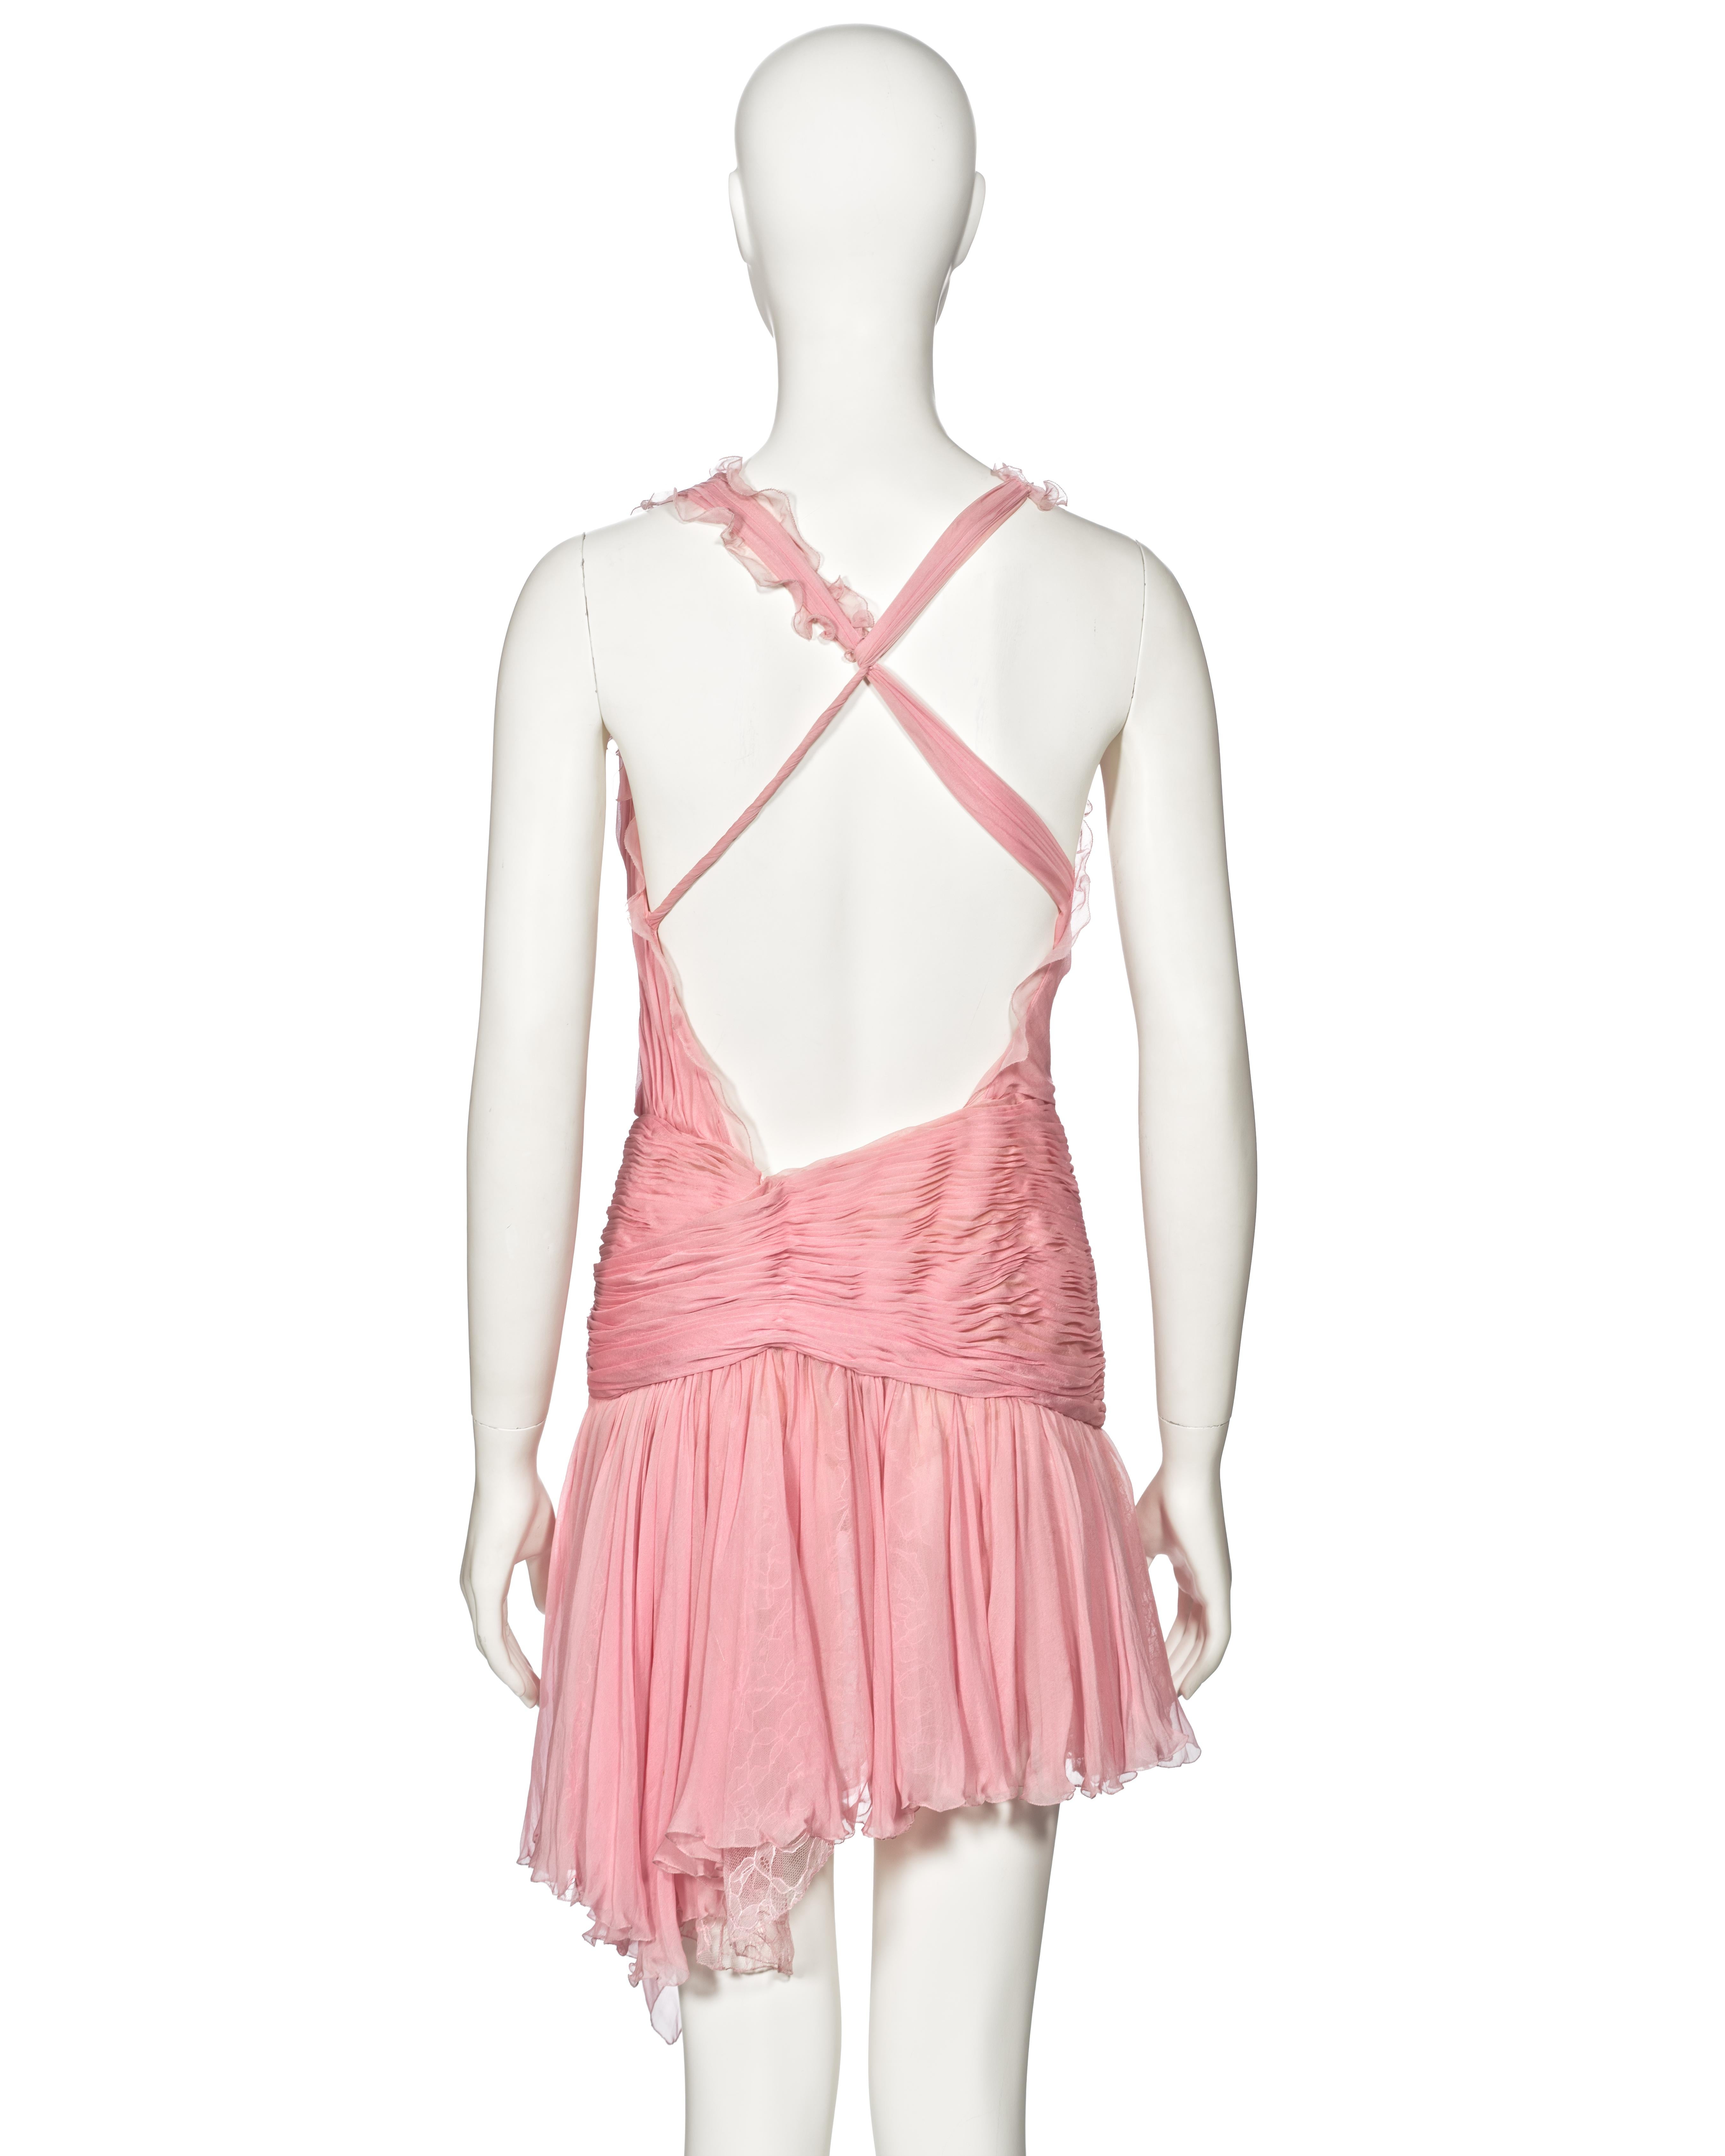 Atelier Versace Couture Pink Pleated Silk and Lace Mini Dress, ss 2004 For Sale 4